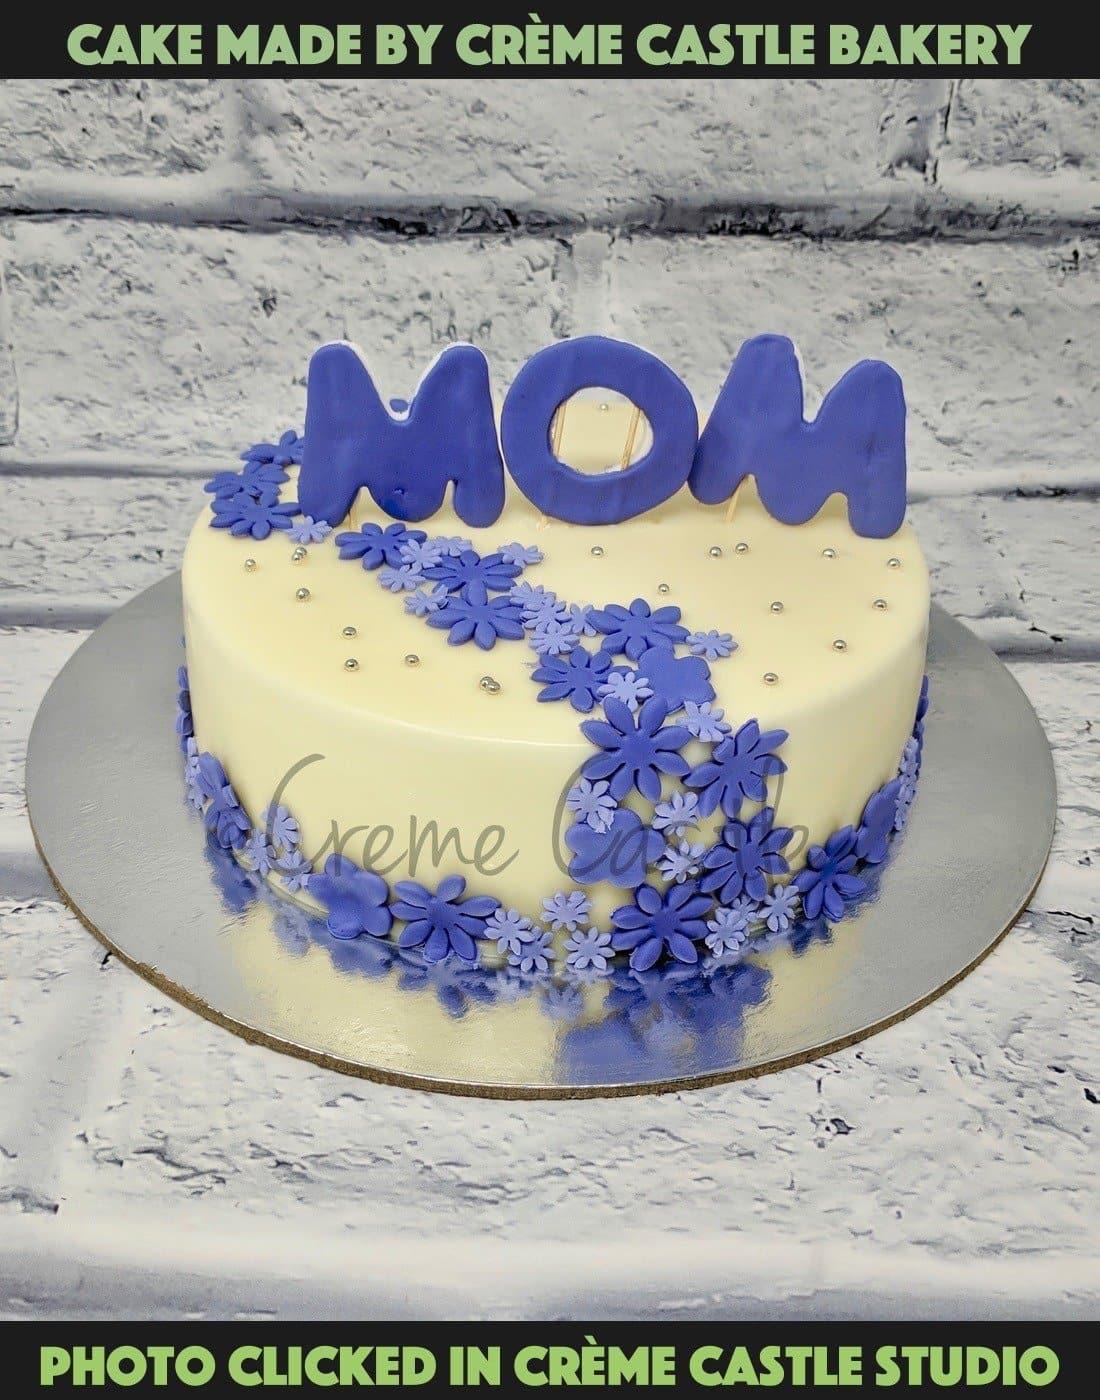 Buy Cakes for Mother's Day | Mother's Day Special Cakes | Tfcakes